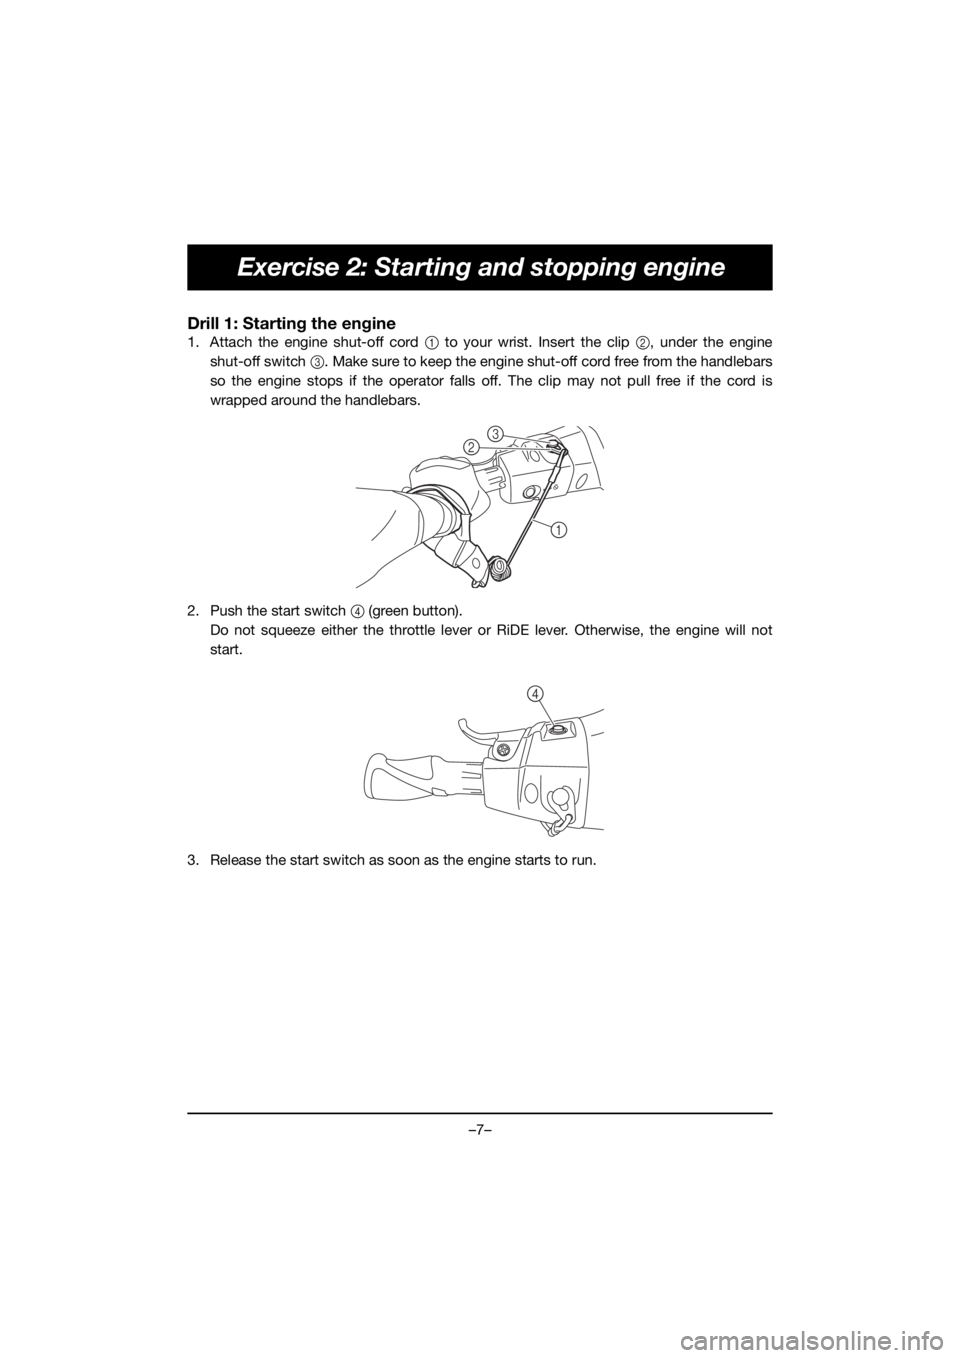 YAMAHA FJR1300 2019  Notices Demploi (in French) –7–
Exercise 2: Starting and stopping engine
Drill 1: Starting the engine
1. Attach the engine shut-off cord 1 to your wrist. Insert the clip 2, under the engine
shut-off switch 3. Make sure to ke